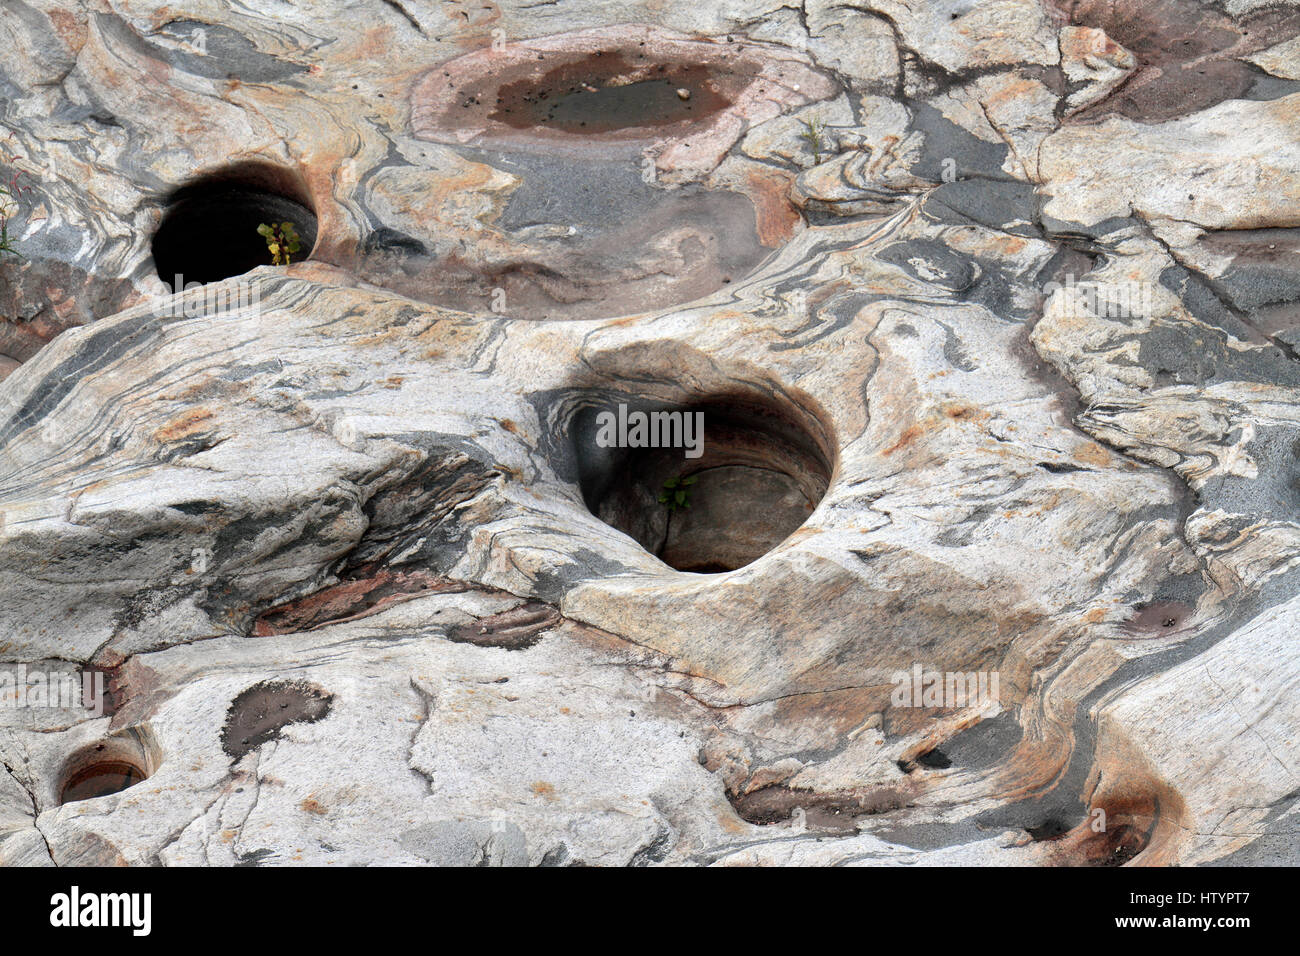 Glacial potholes (a feature of glaciation) on the Deerfield River, Shelburne Falls, Massachusetts. United States. Stock Photo